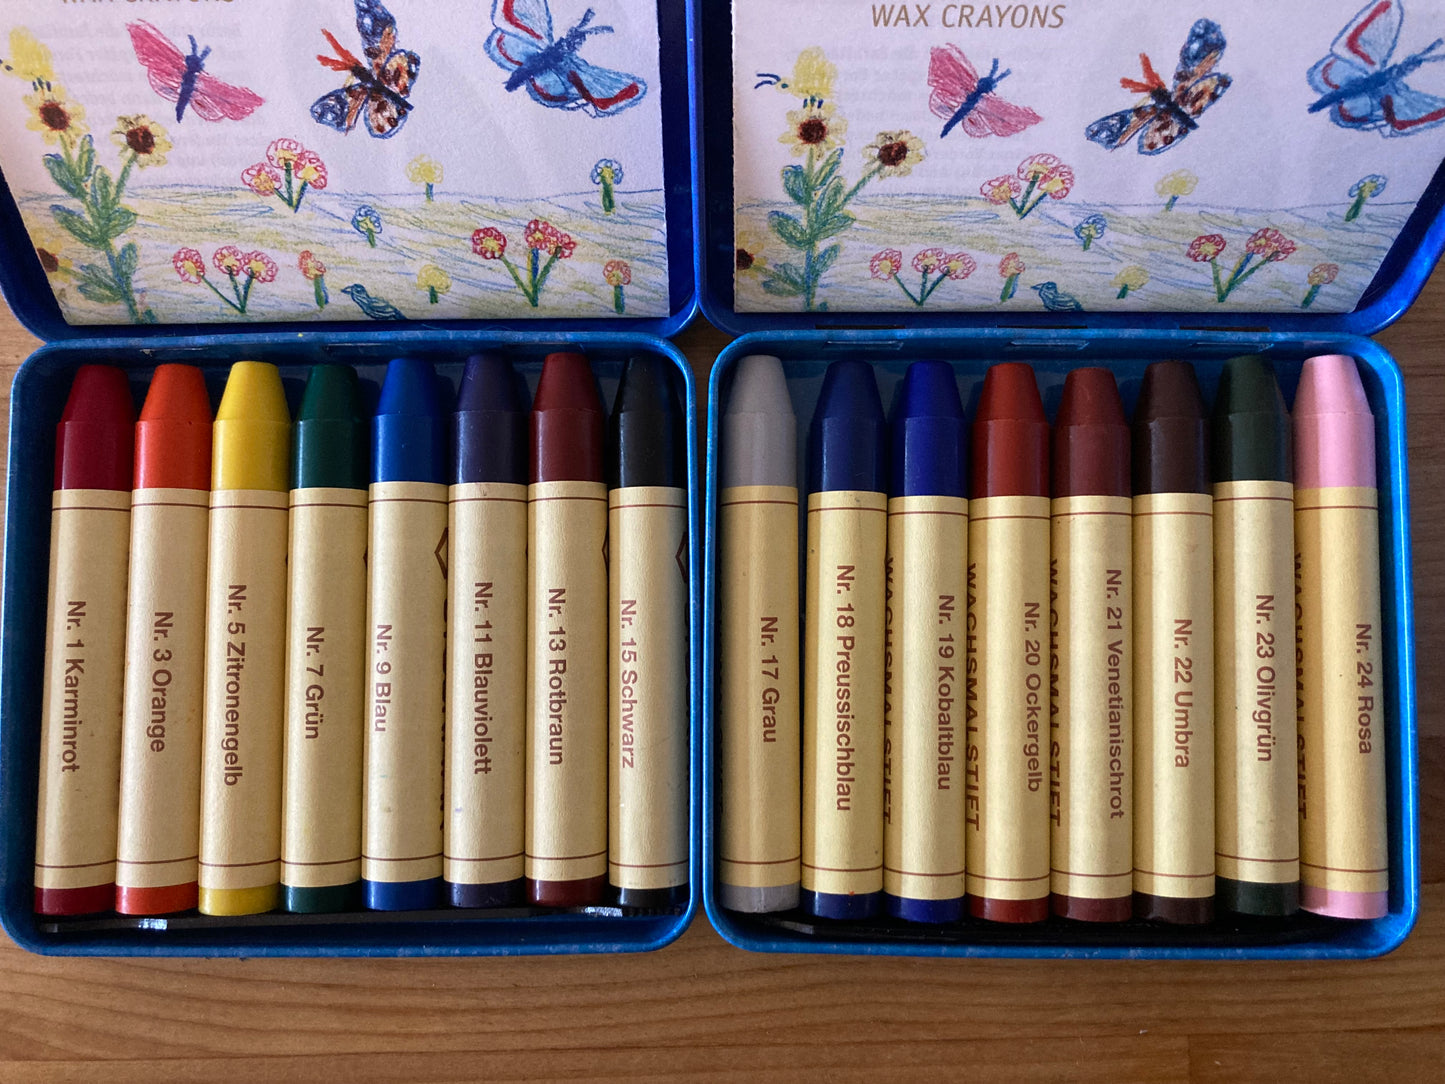 Beeswax, Art - 16 COLOURS IN TWO TINS OF 8 BEESWAX STICK CRAYONS!